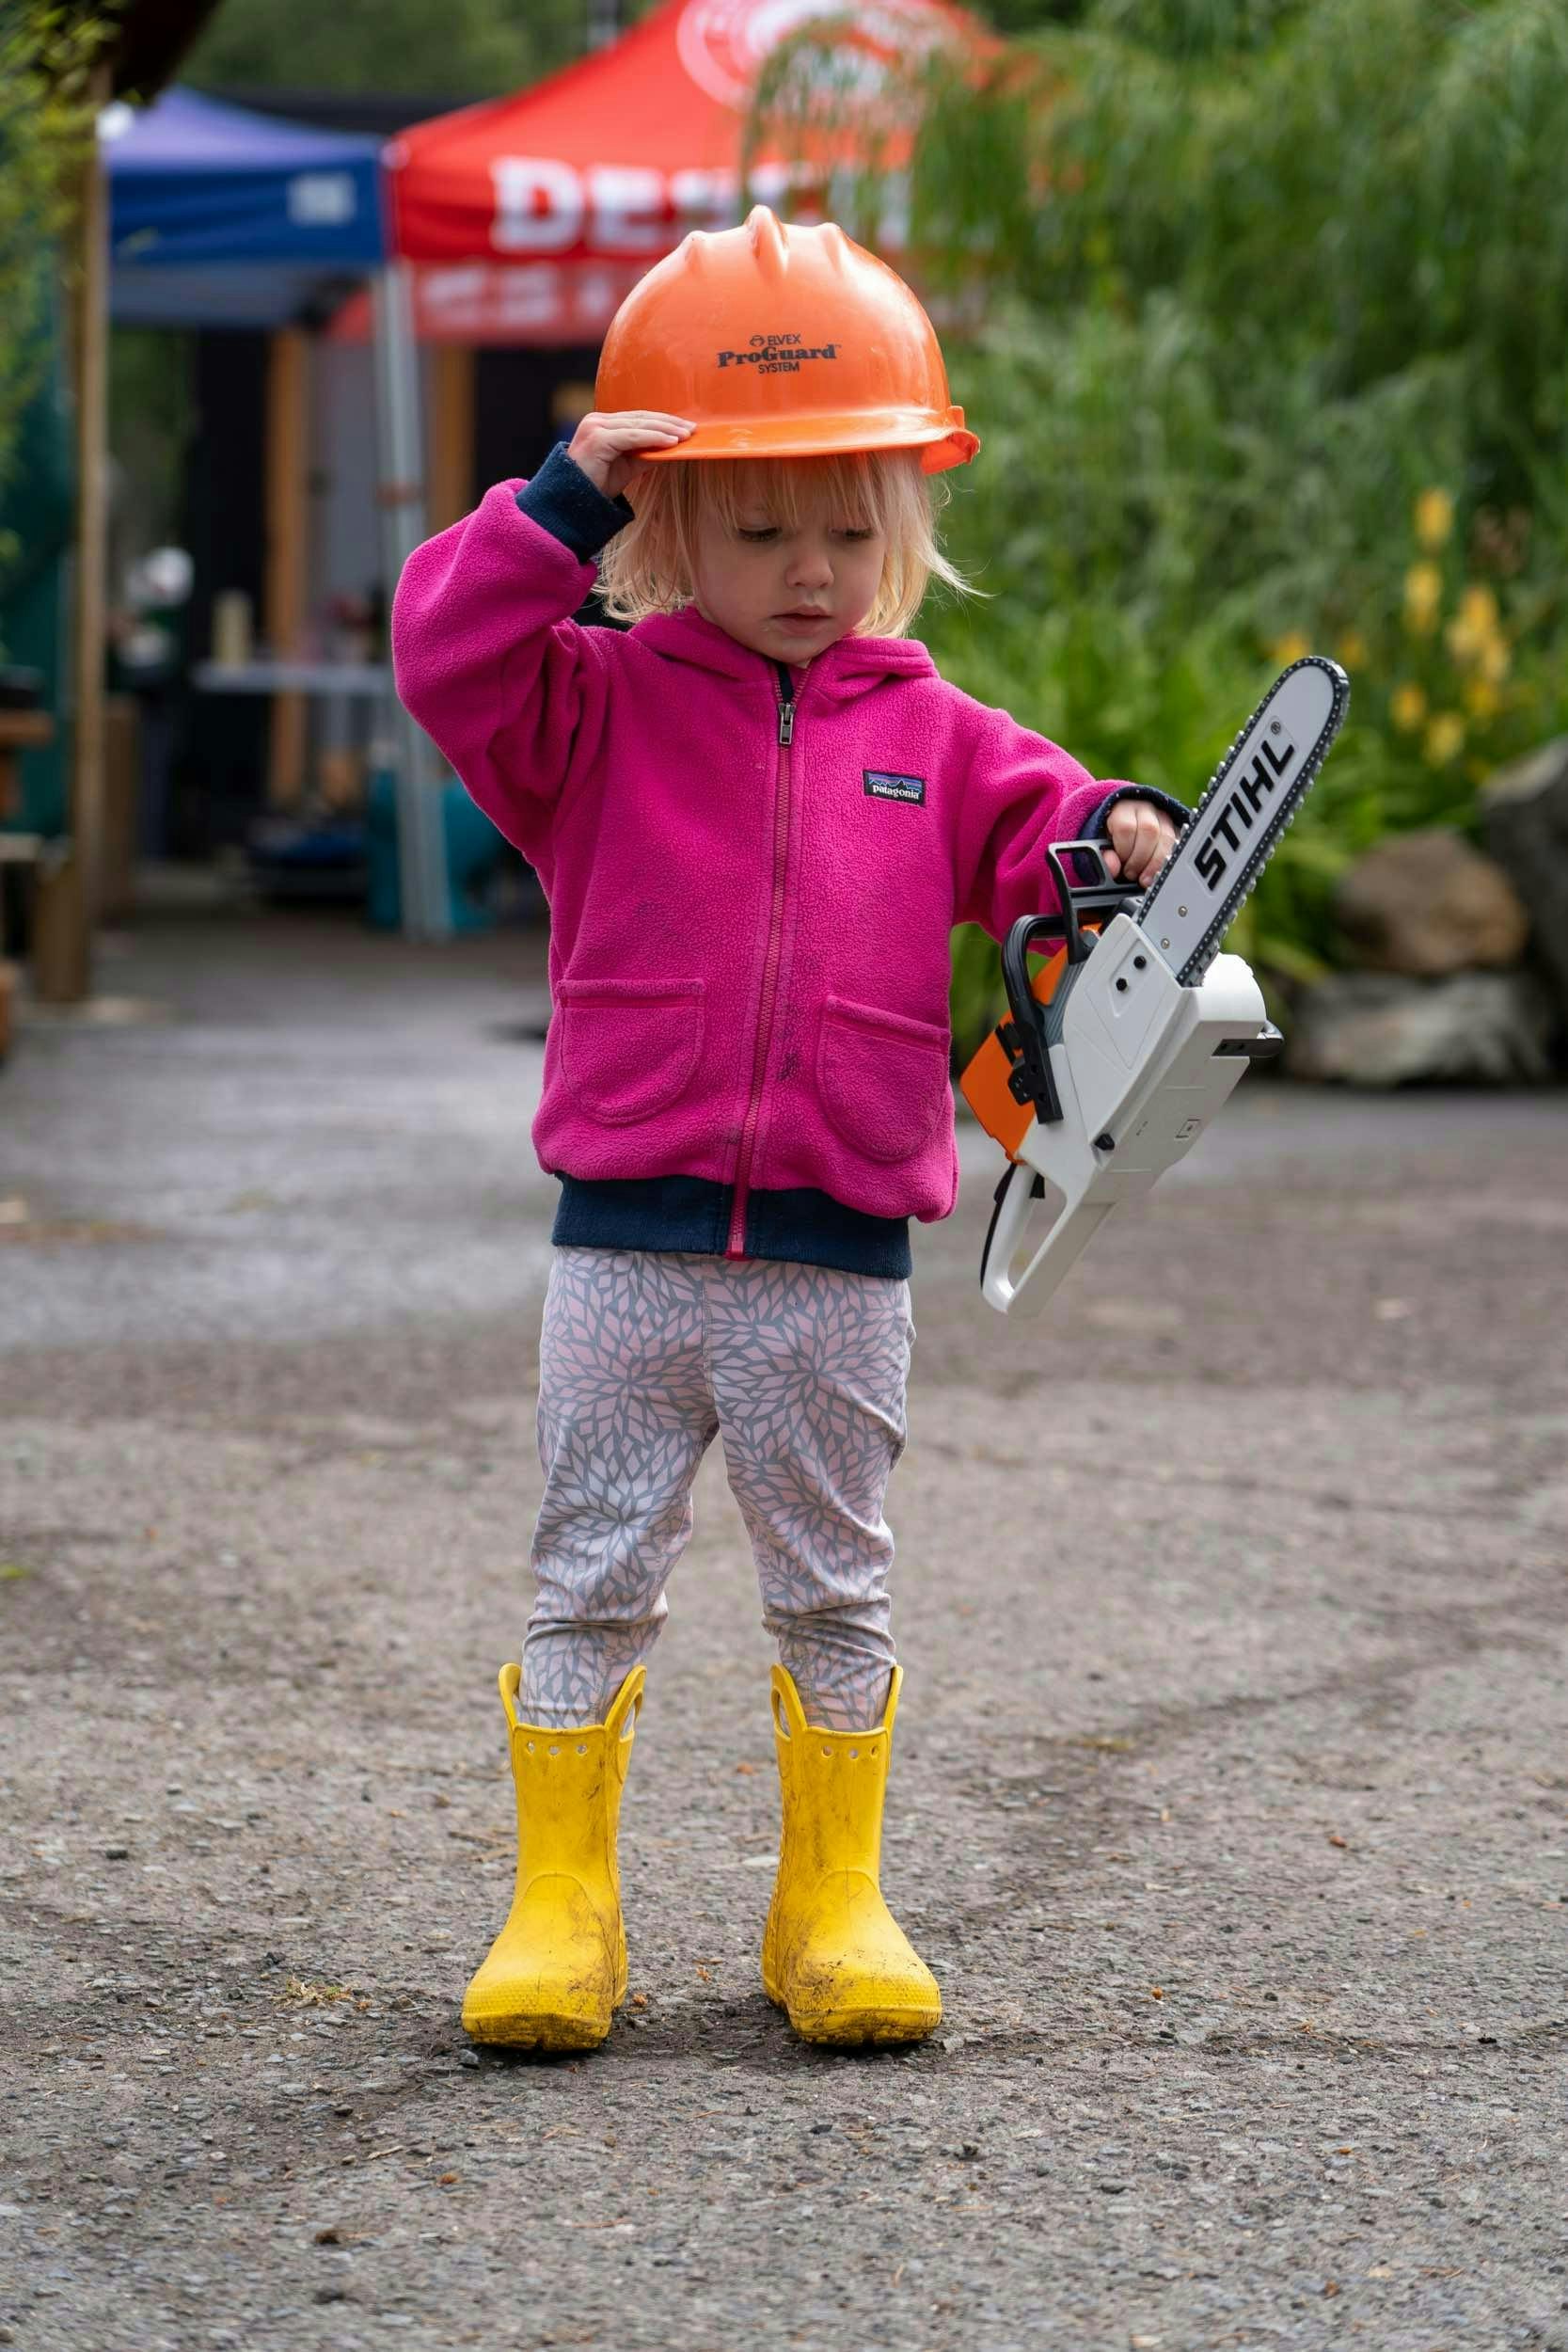 A young girl holding a child sized STIHL chainsaw